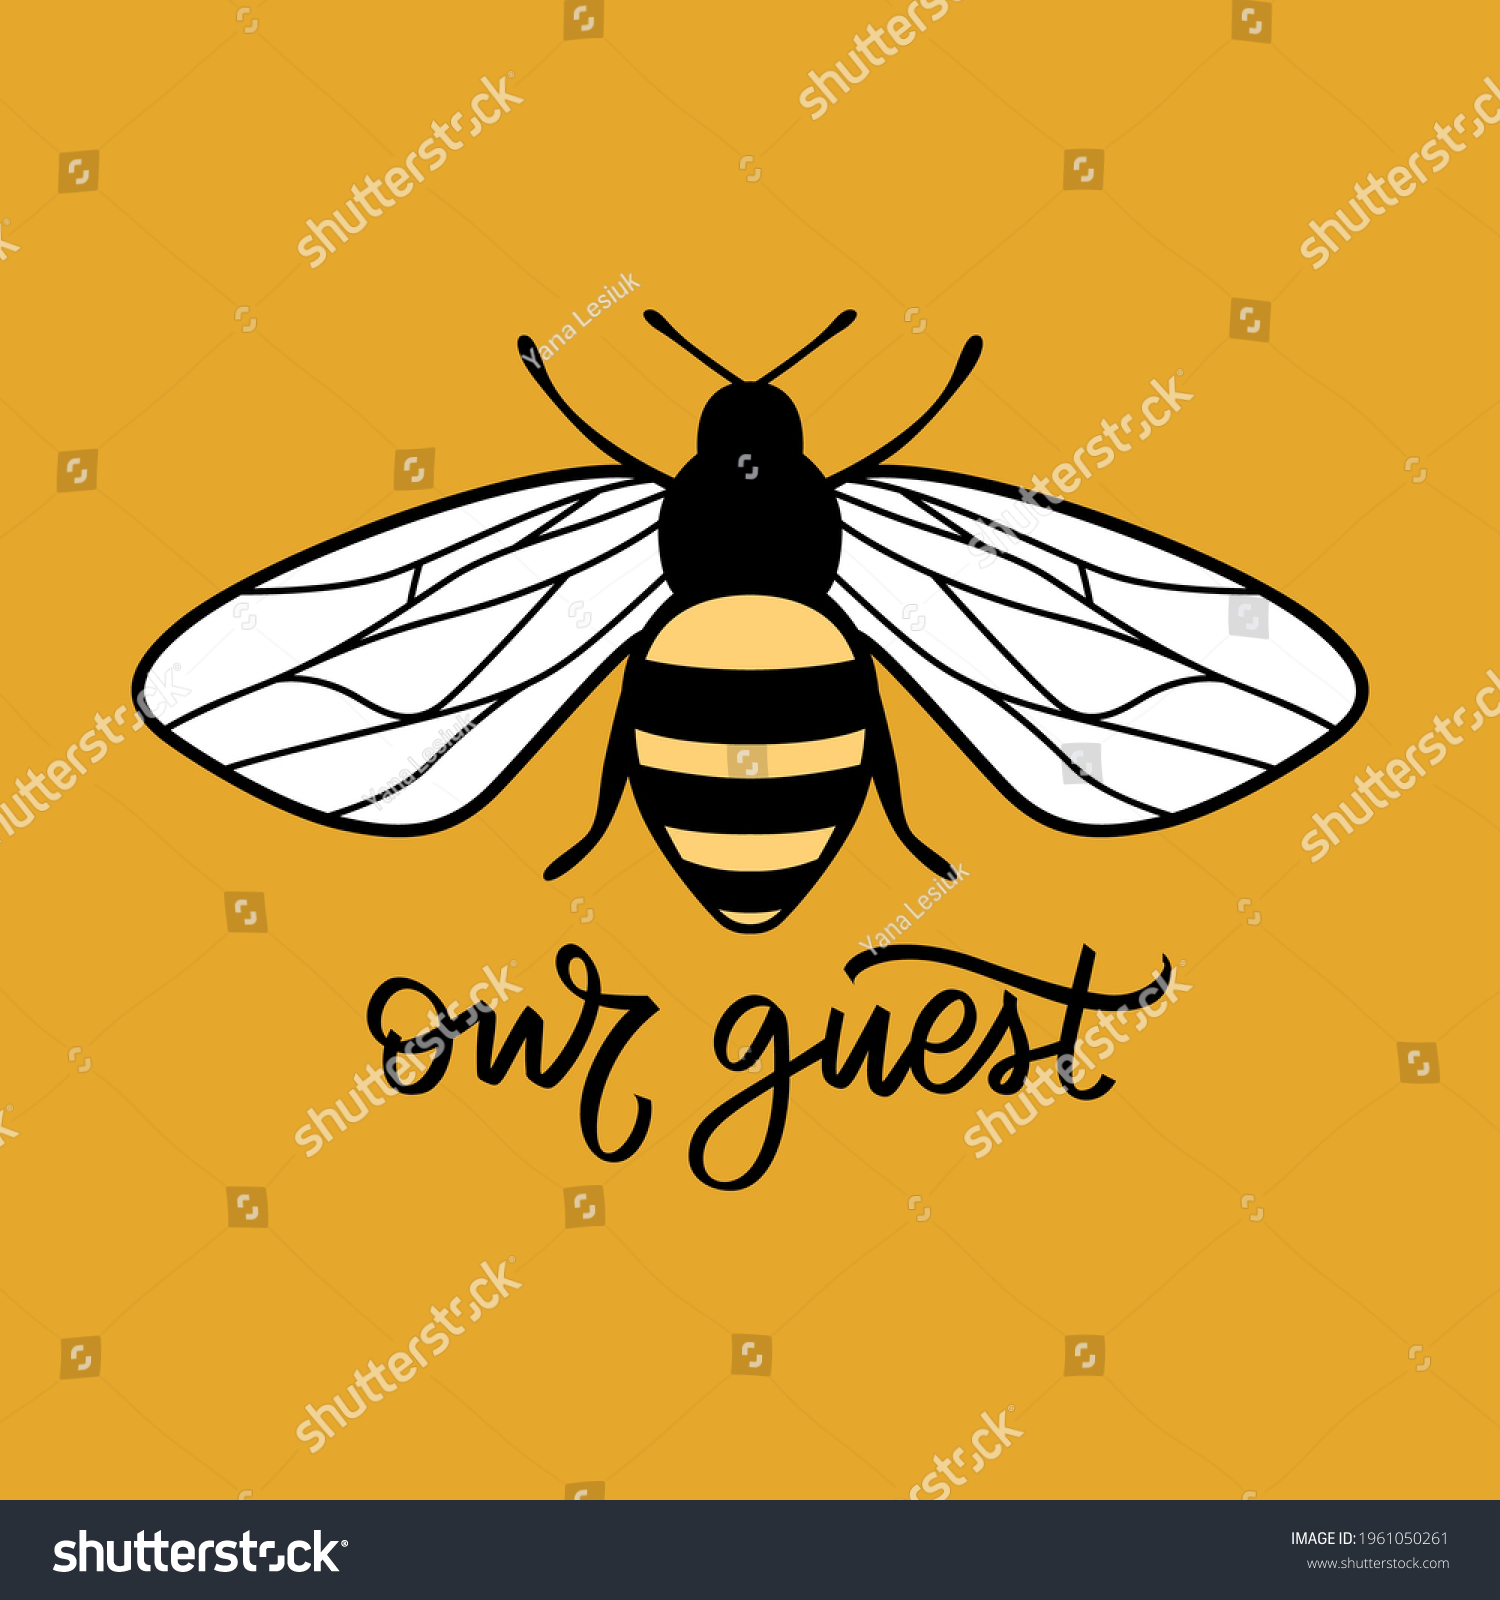 SVG of Vector cute bee illustration in flat style. Cartoon flying honey bee character isolated on yellow background. Buzzing insect. Funny and positive quote, pun or phrase. Bee our guest. svg